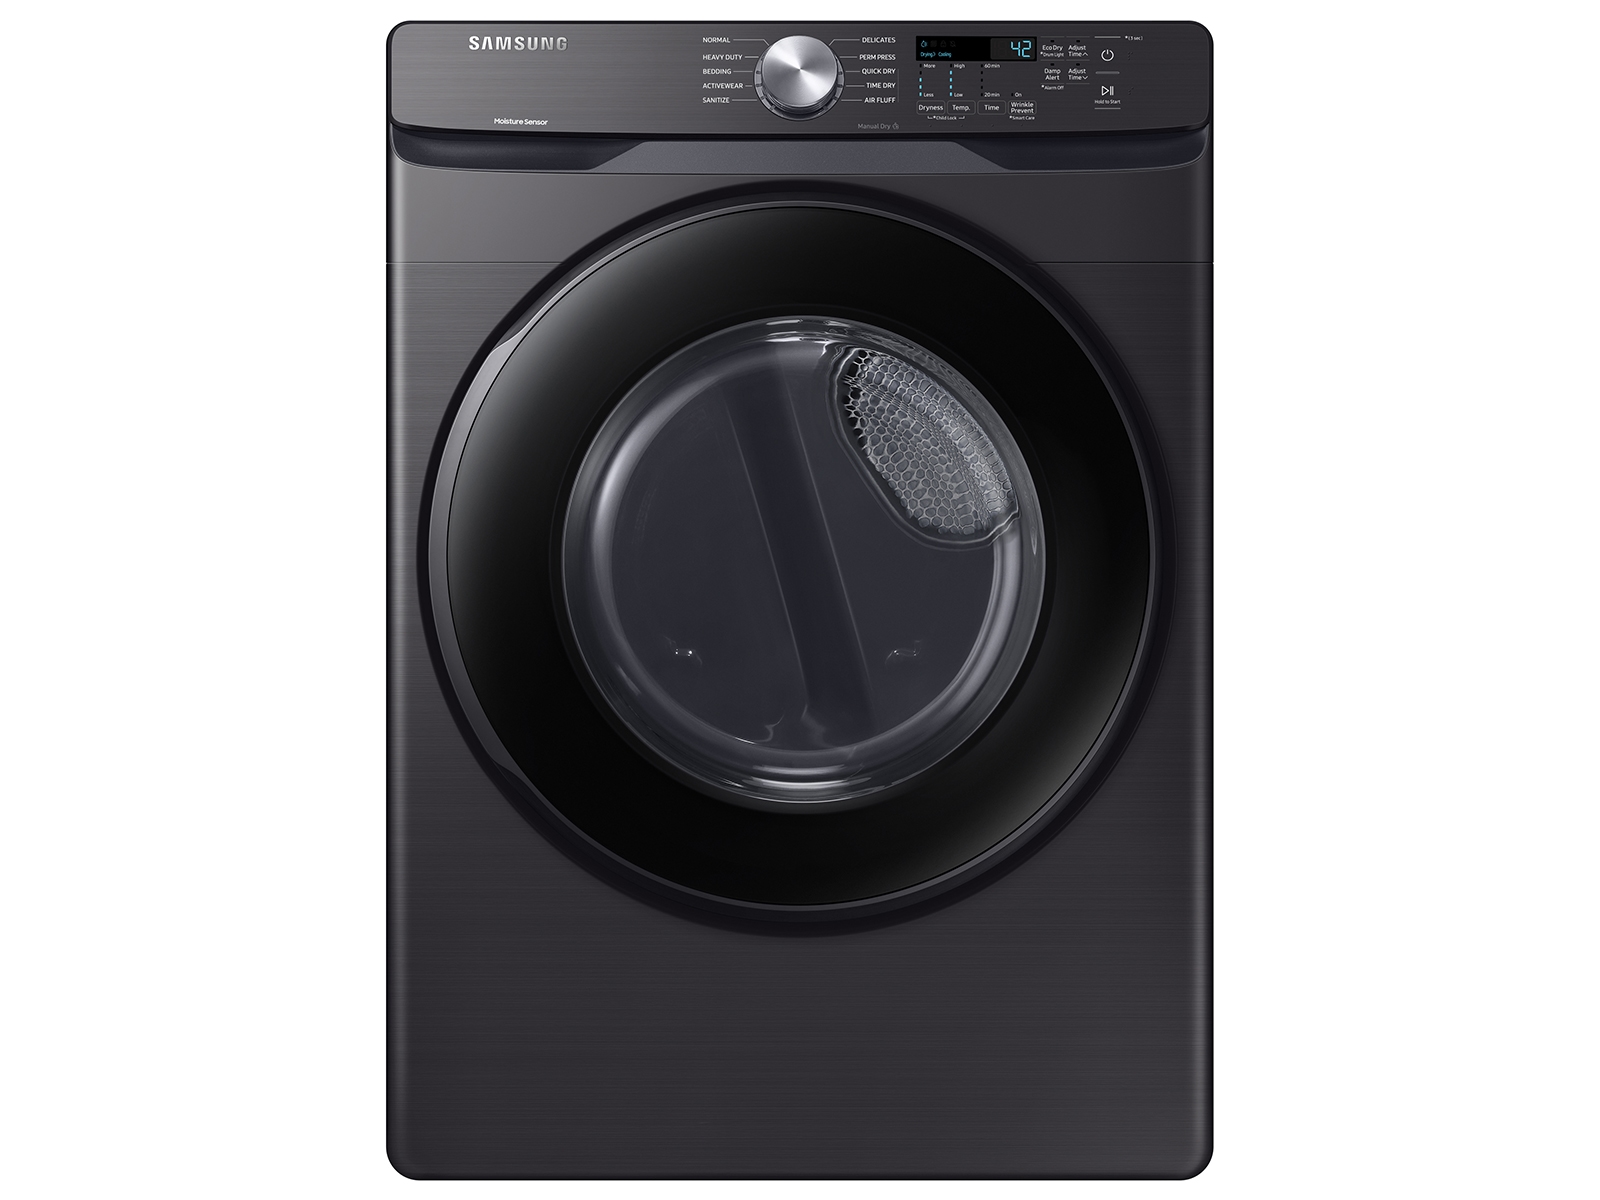 Photos - Tumble Dryer Samsung 7.5 cu. ft. Gas Dryer with Sensor Dry in Brushed Black(DVG45T6000V 